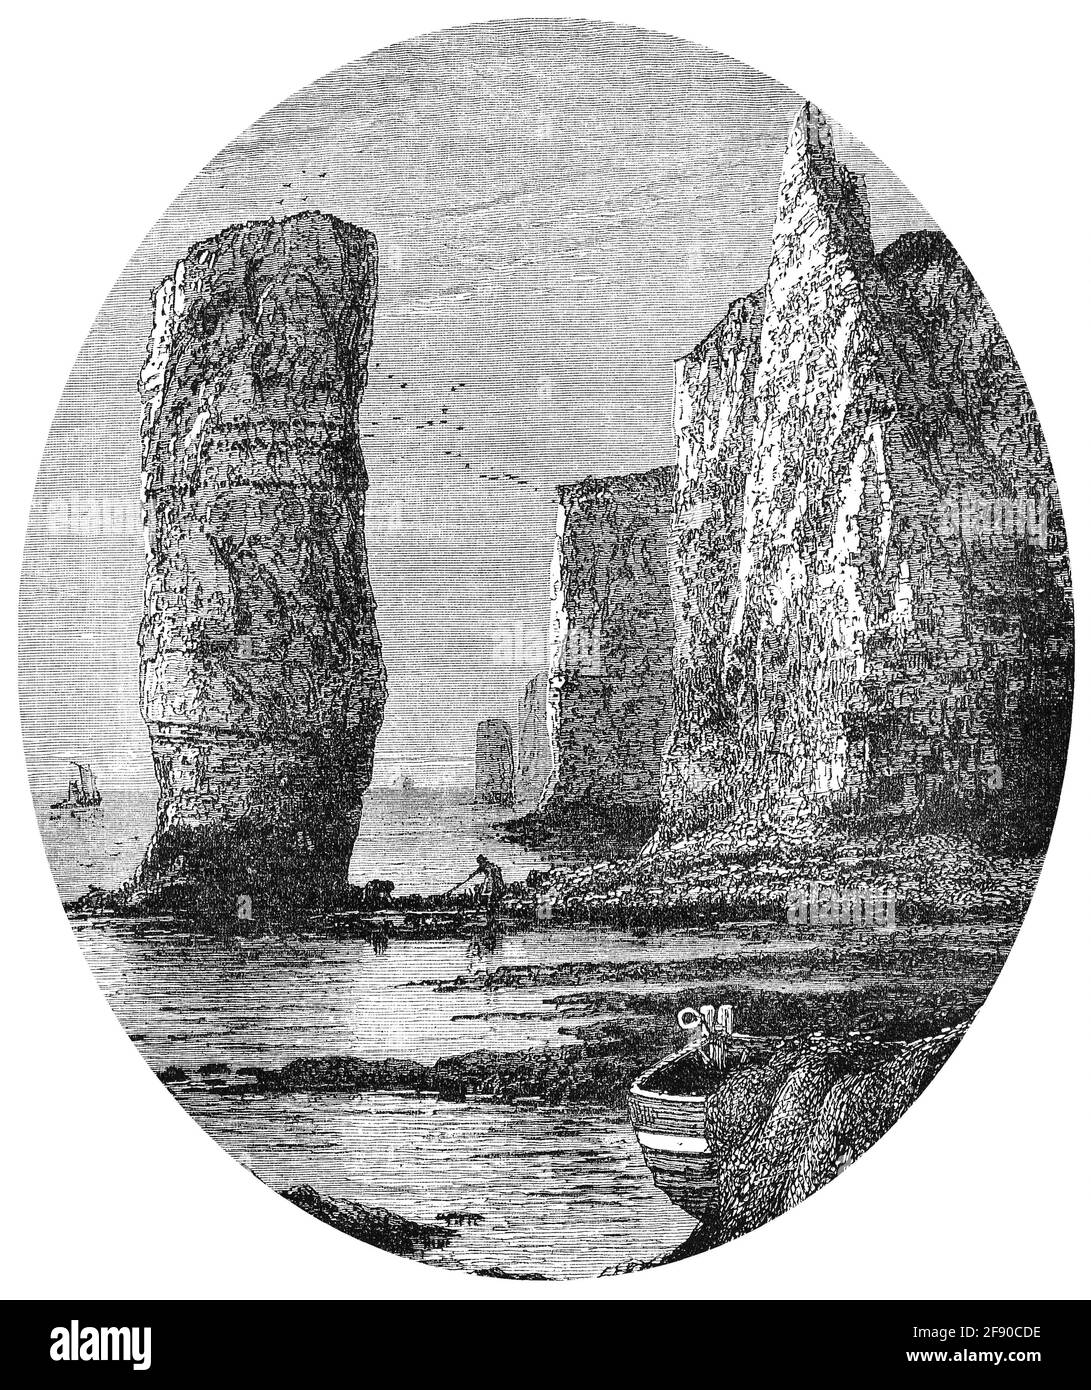 1887 vintage engraving of the Old Harry Rocks, chalk rock formations at Handfast Point on the Isle of Purbeck in Dorset, England. Stock Photo